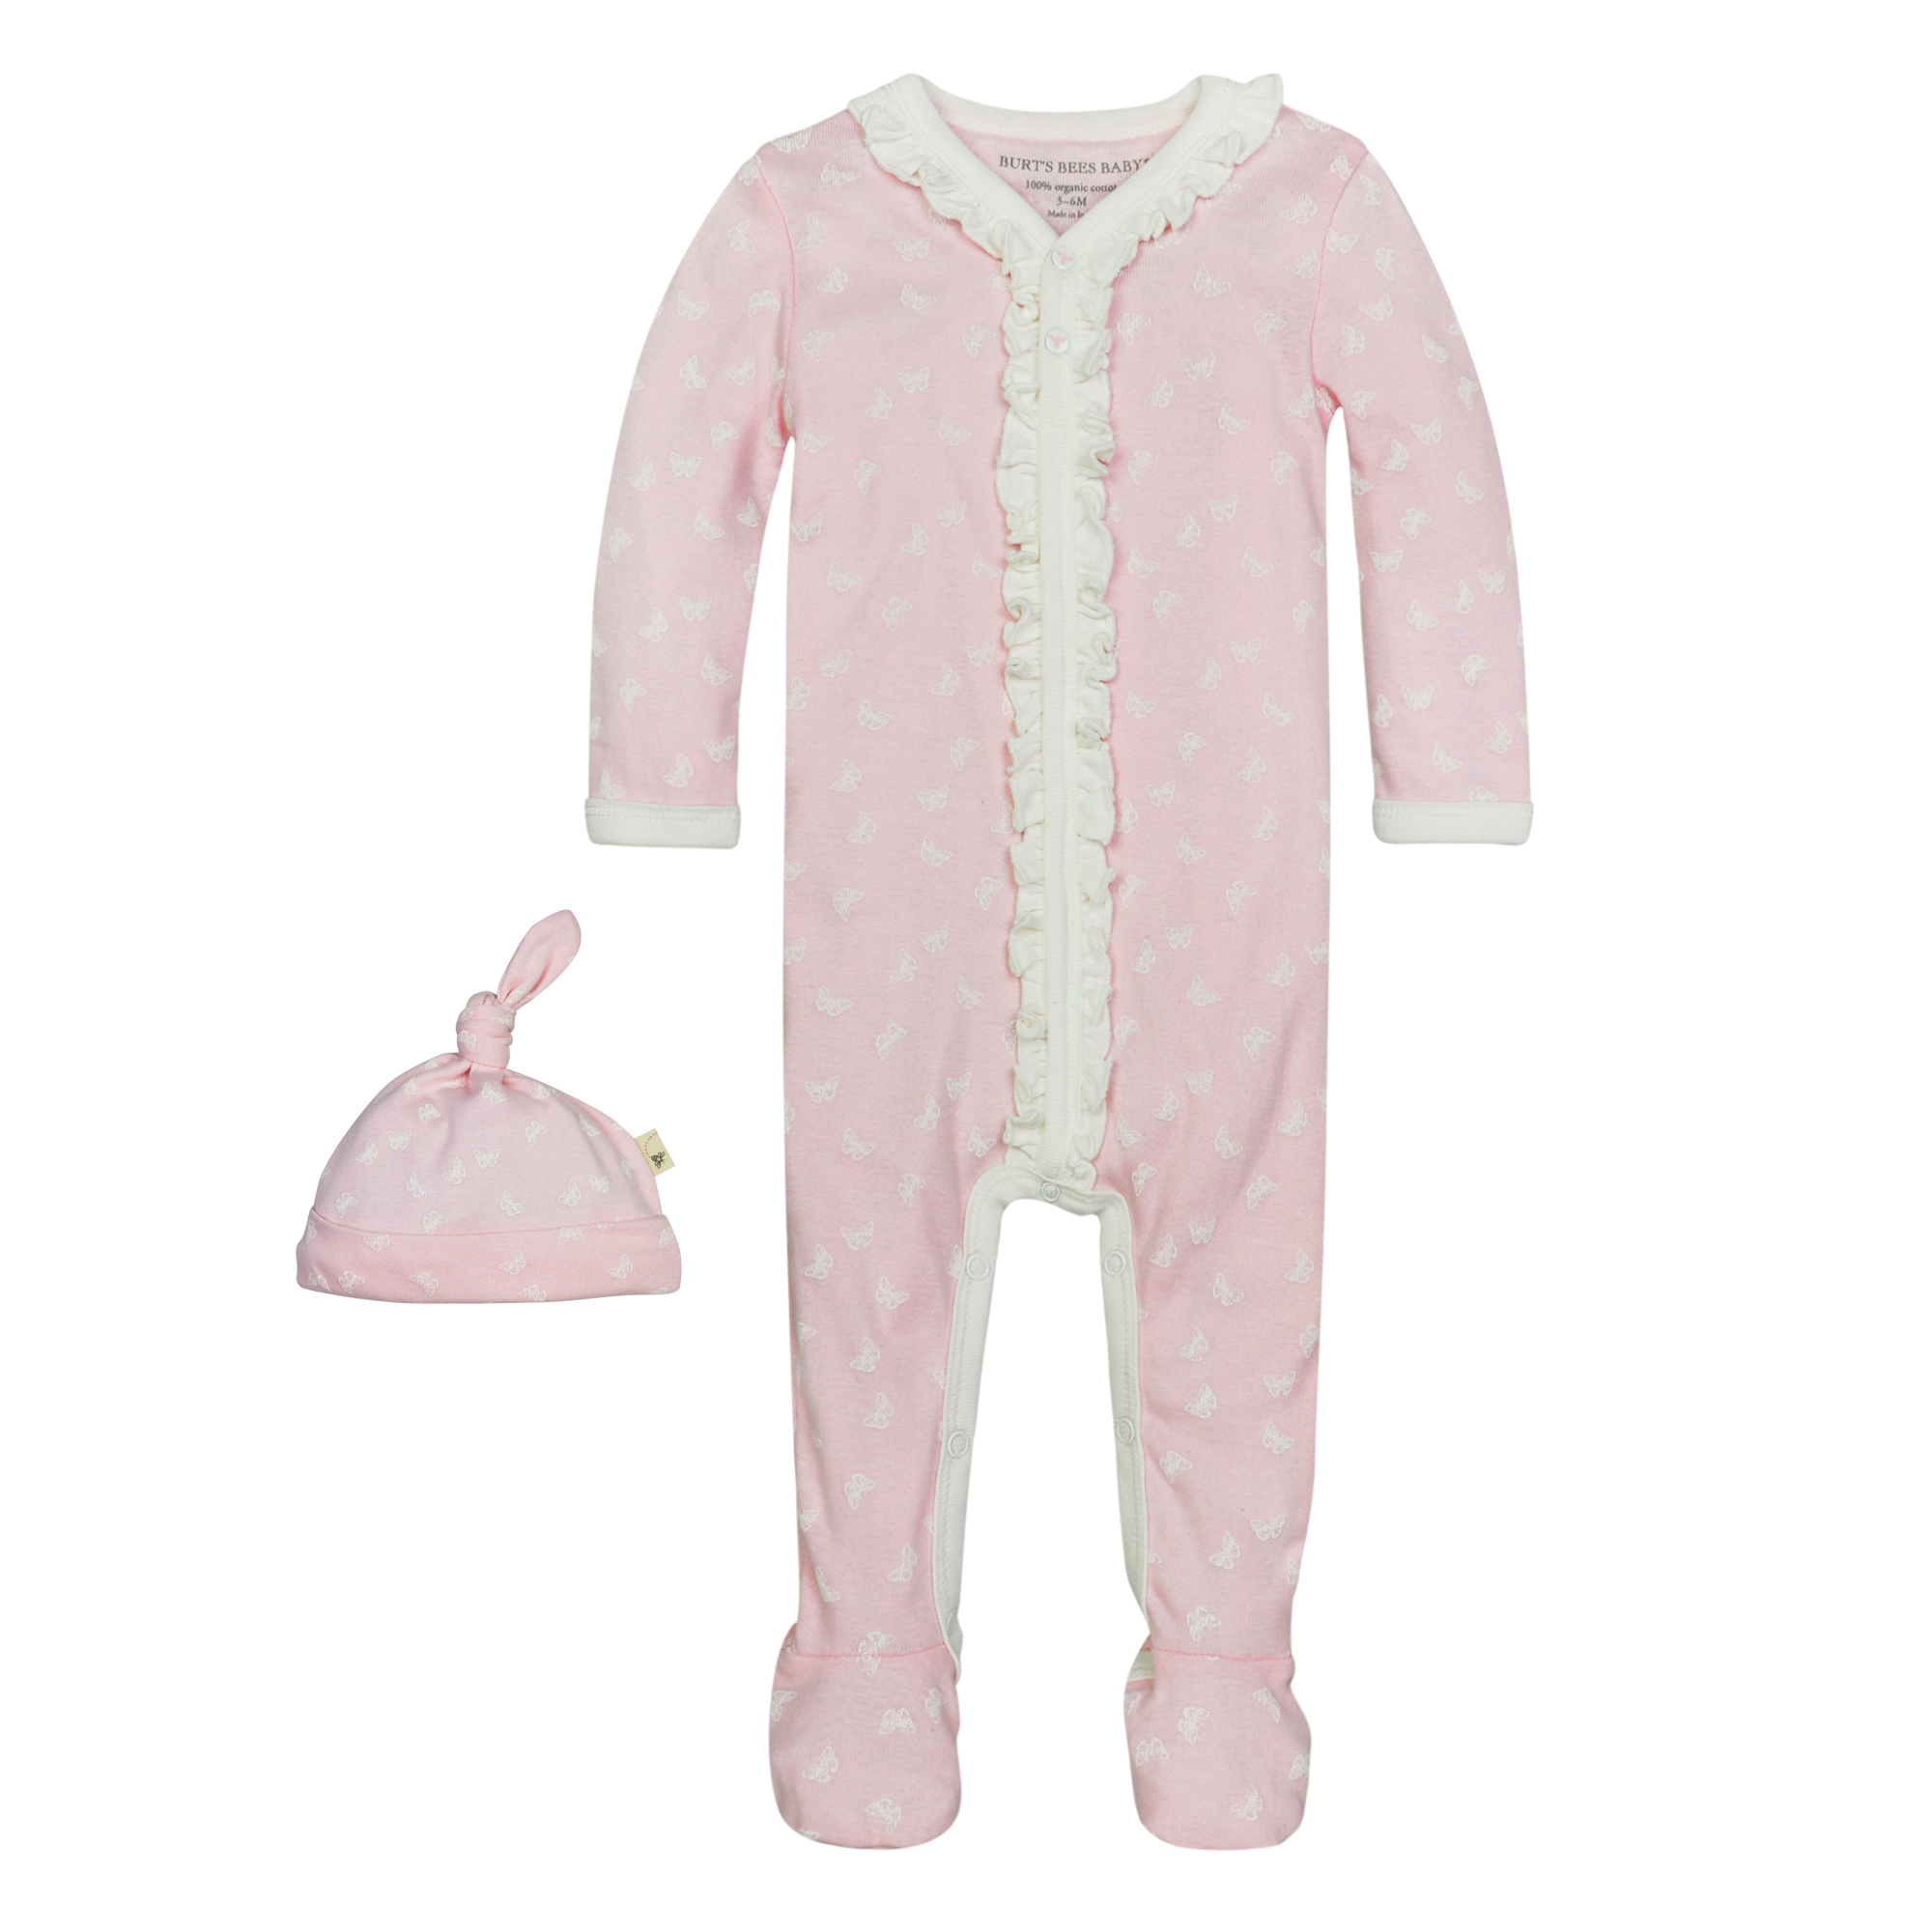 Infant coveralls